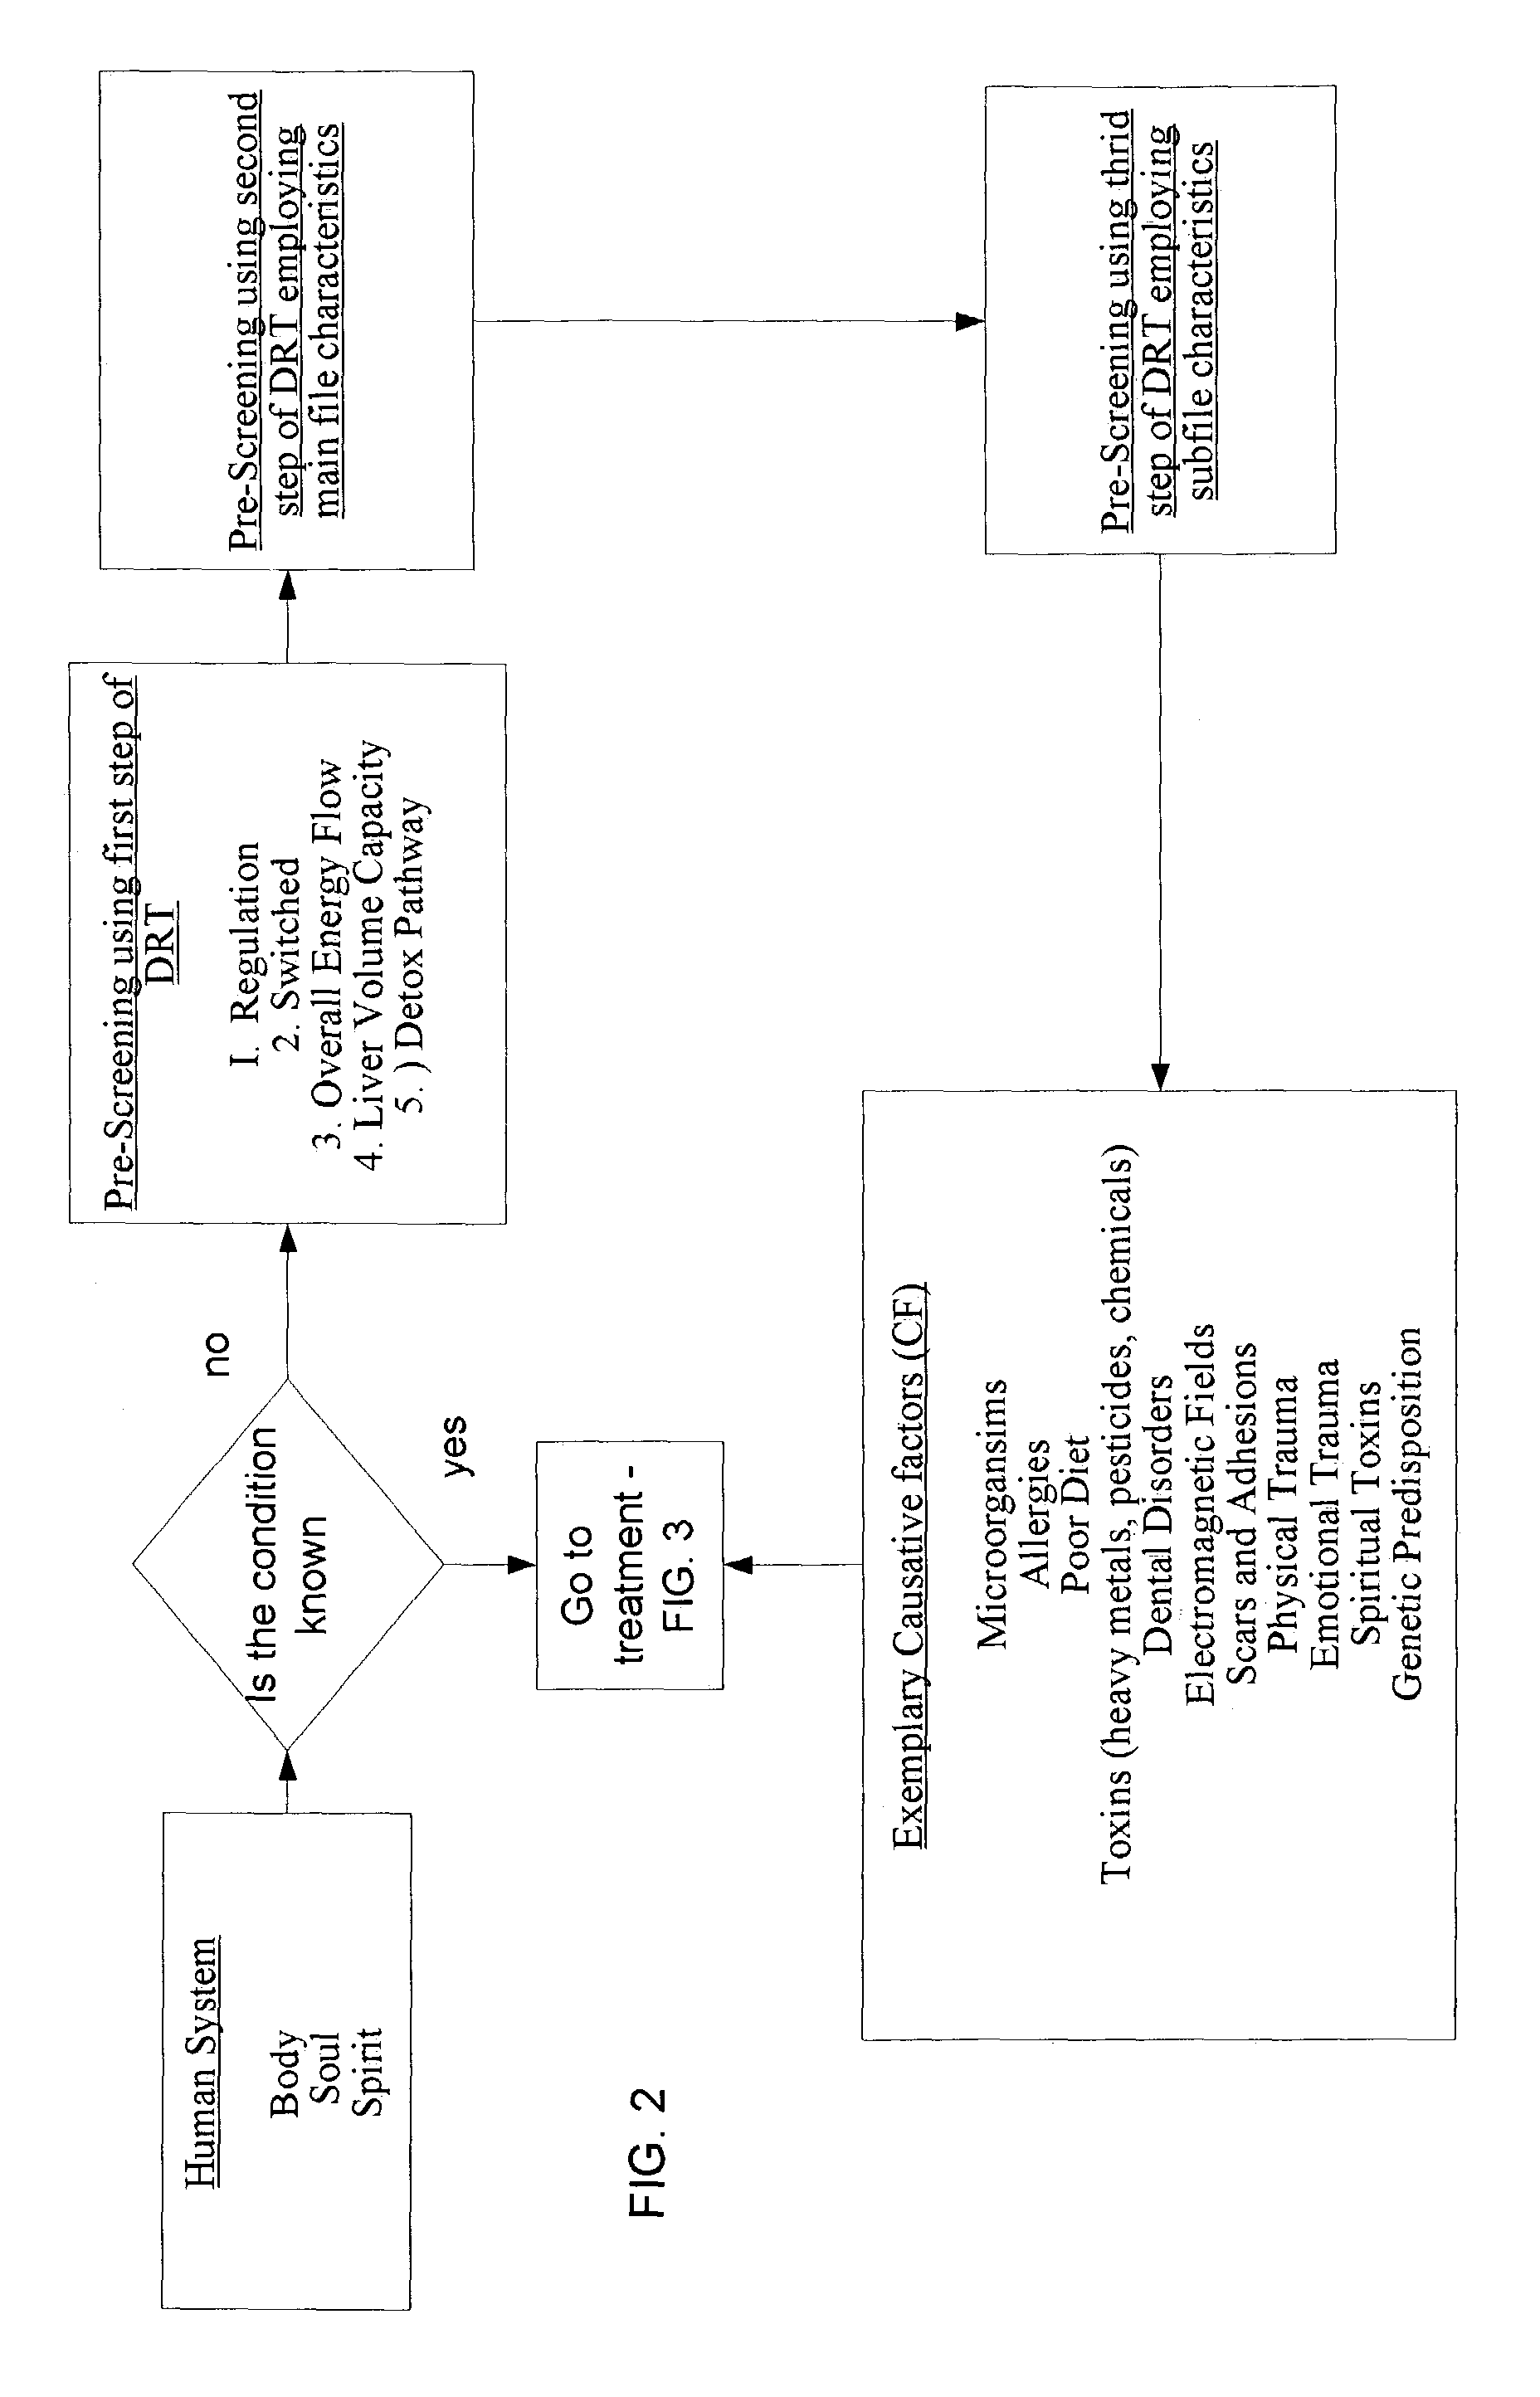 Method for detecting and correcting the root cause of health issues